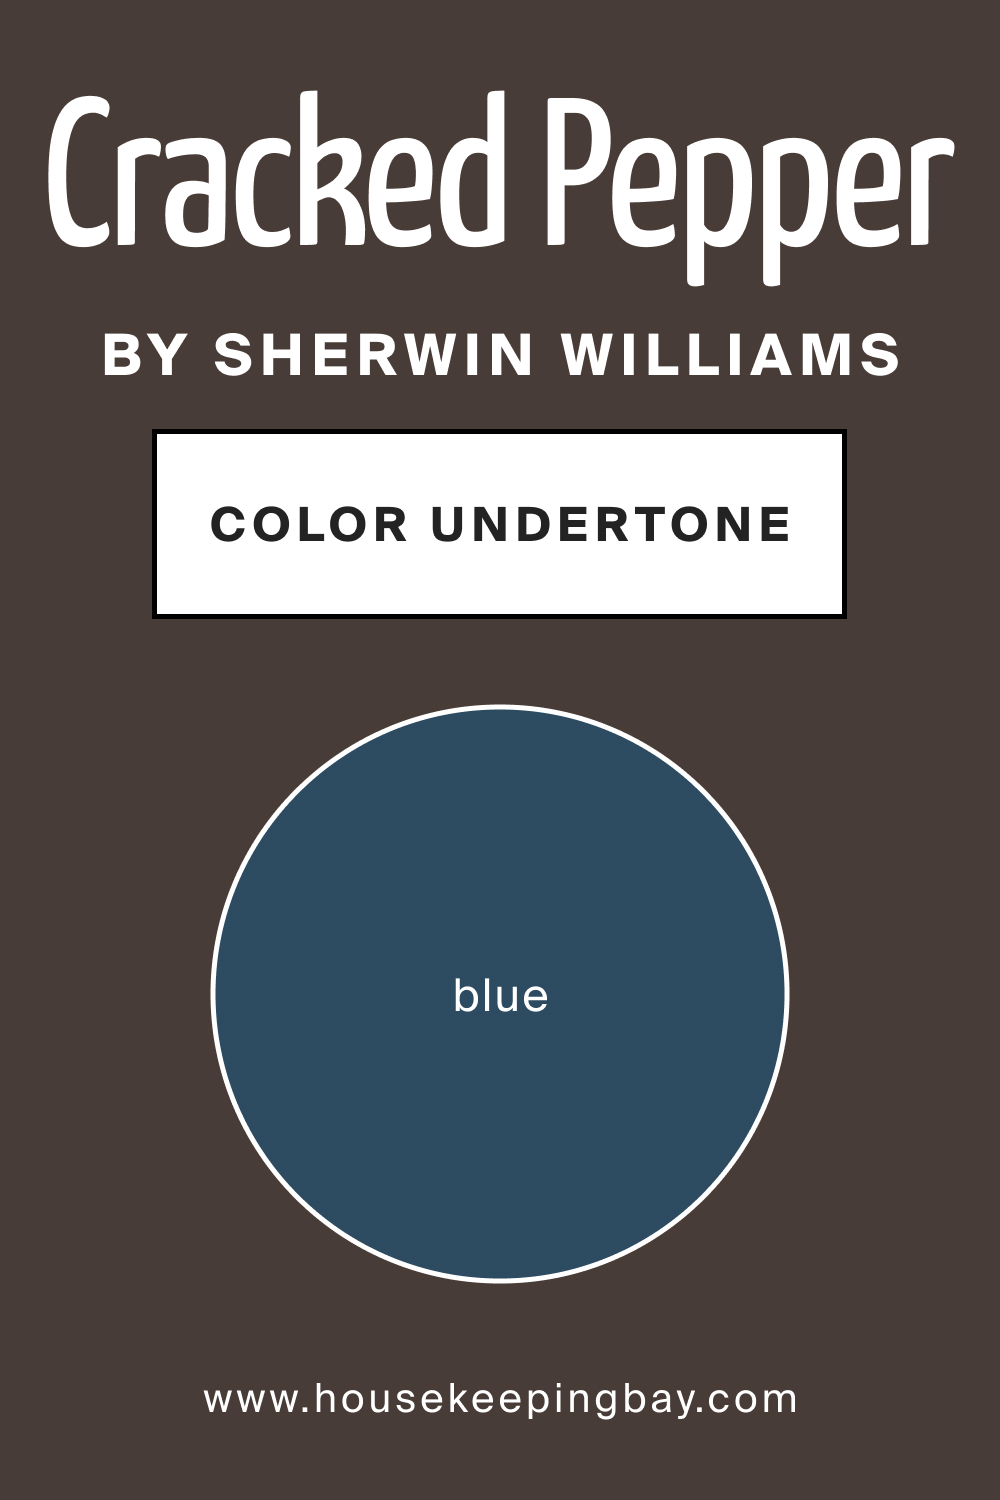 SW 9580 Cracked Pepper by Sherwin Williams Color Undertone